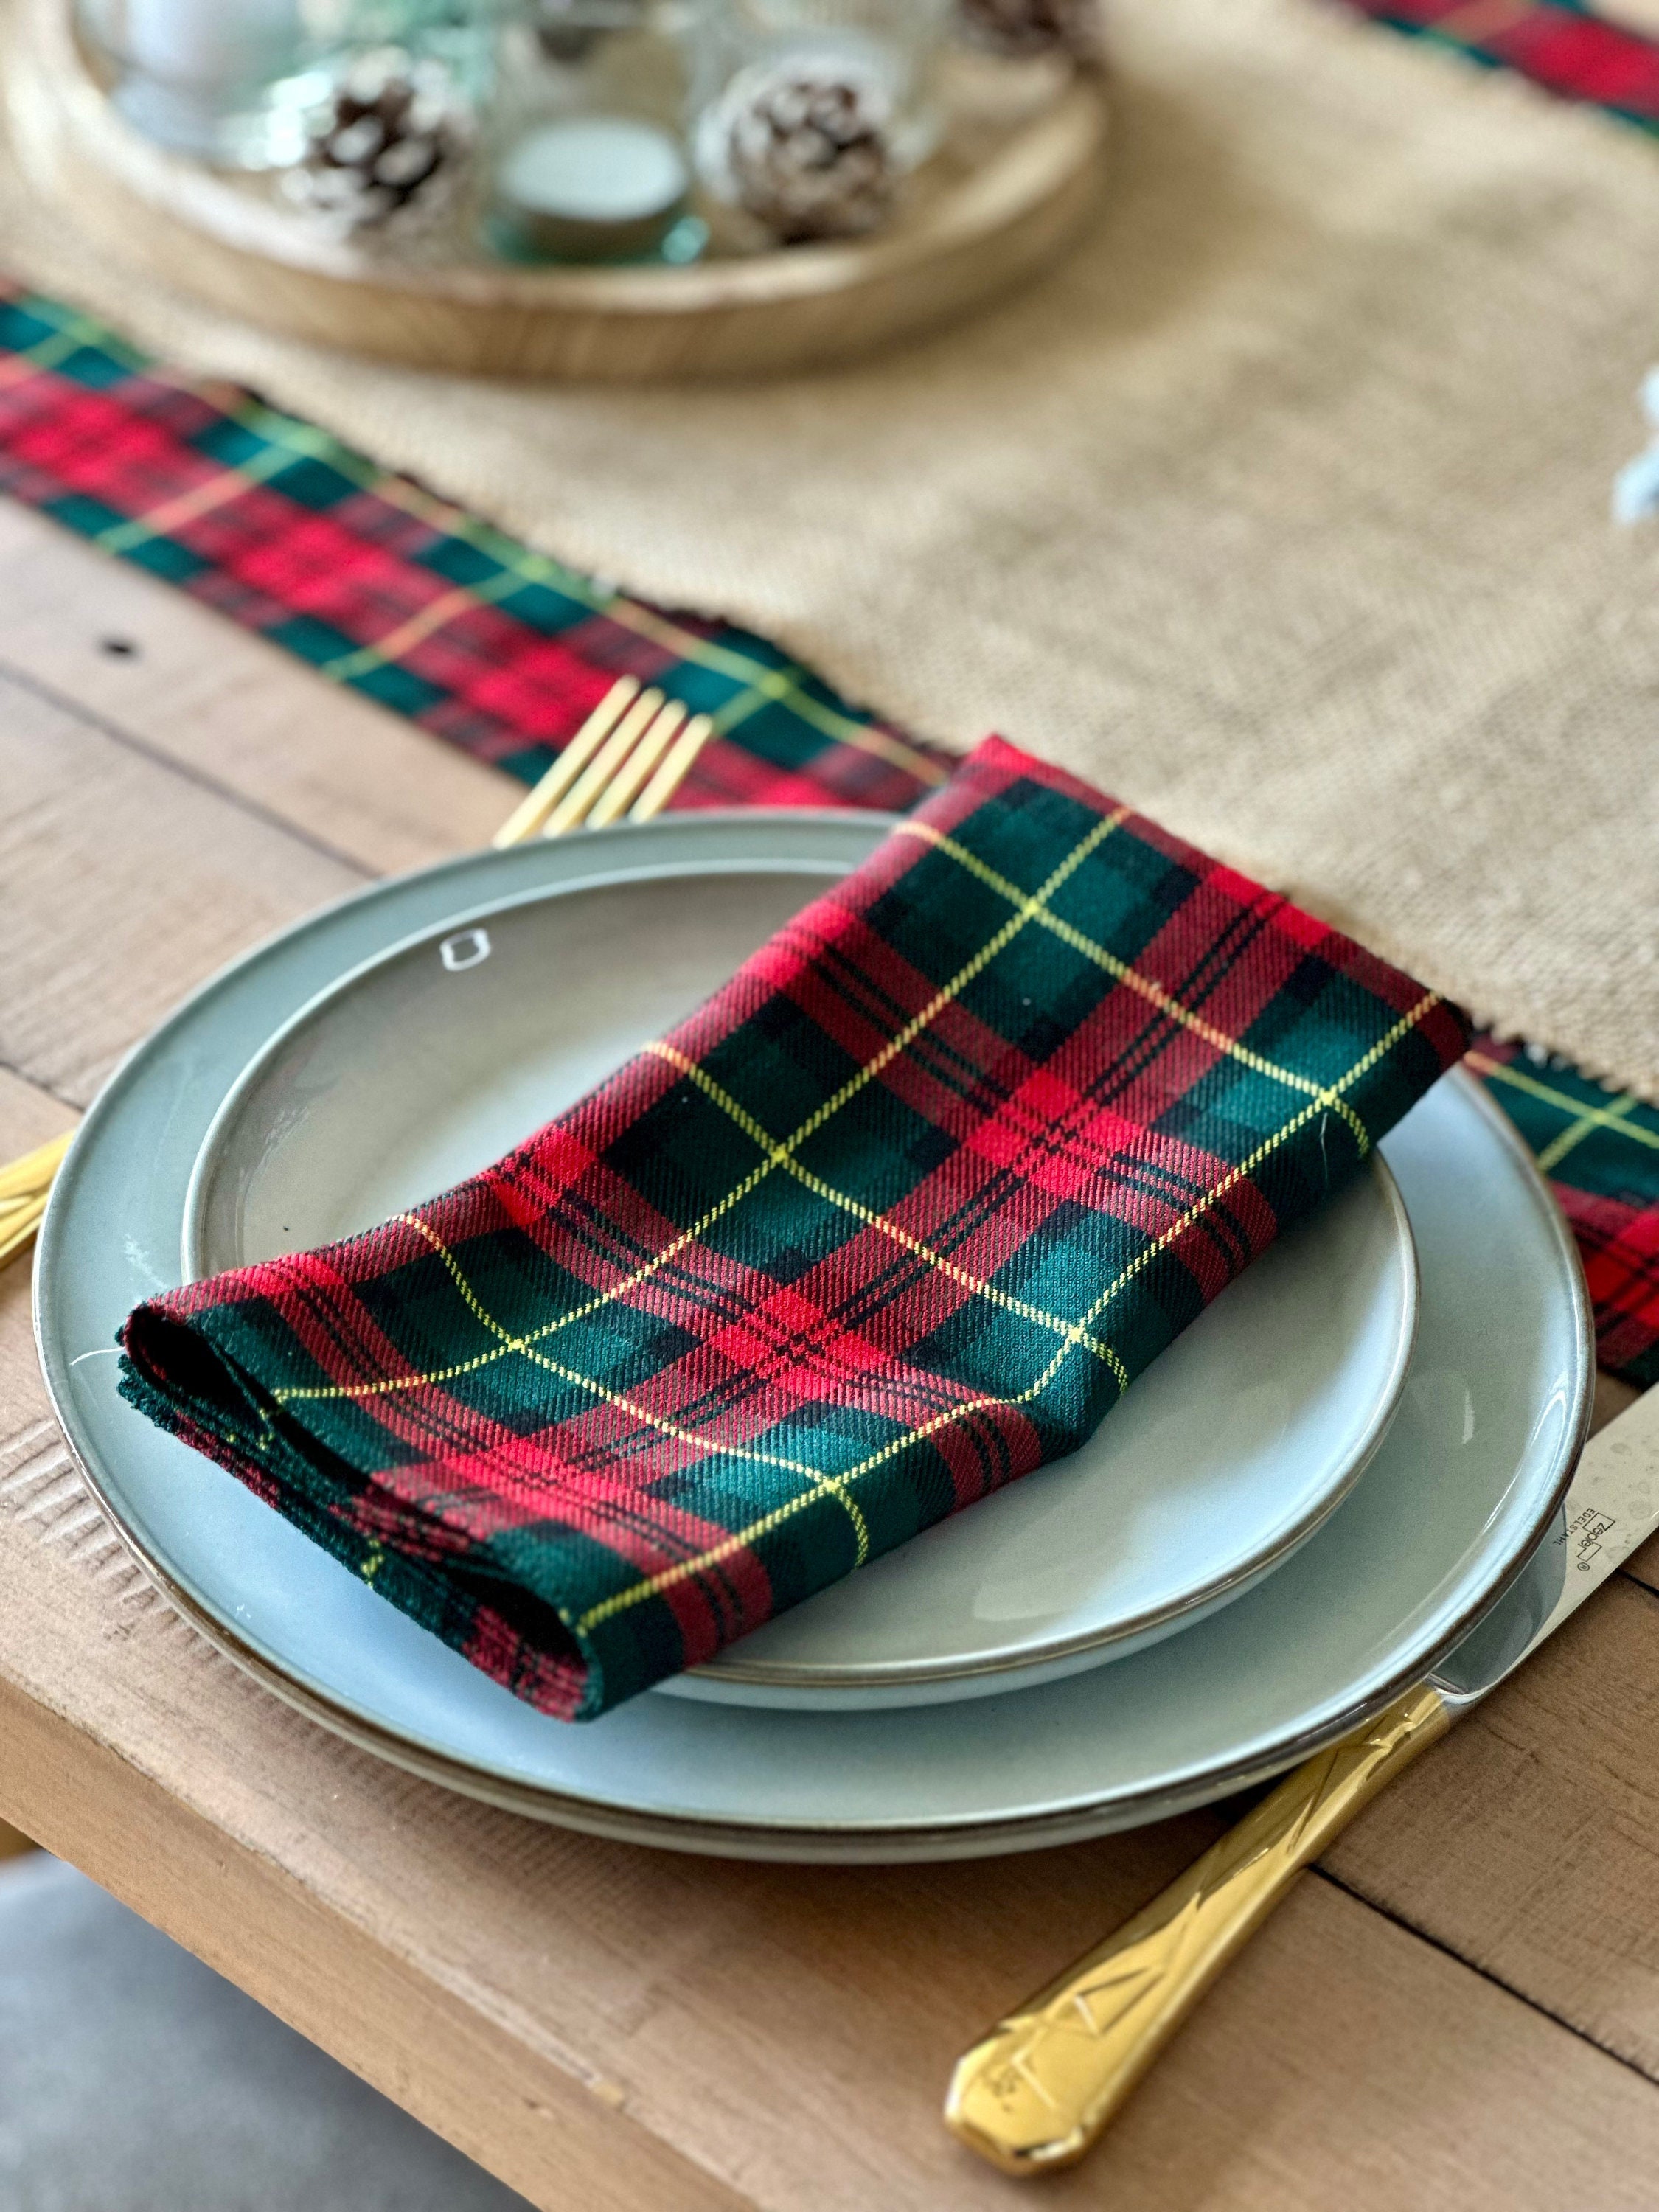 6pcs/Set Vintage American Style Black & White Plaid Polyester Wrinkle-Resistant  Napkins For Hotel, Restaurant And Home Use, Holiday Party Decoration  Tablecloths Napkins